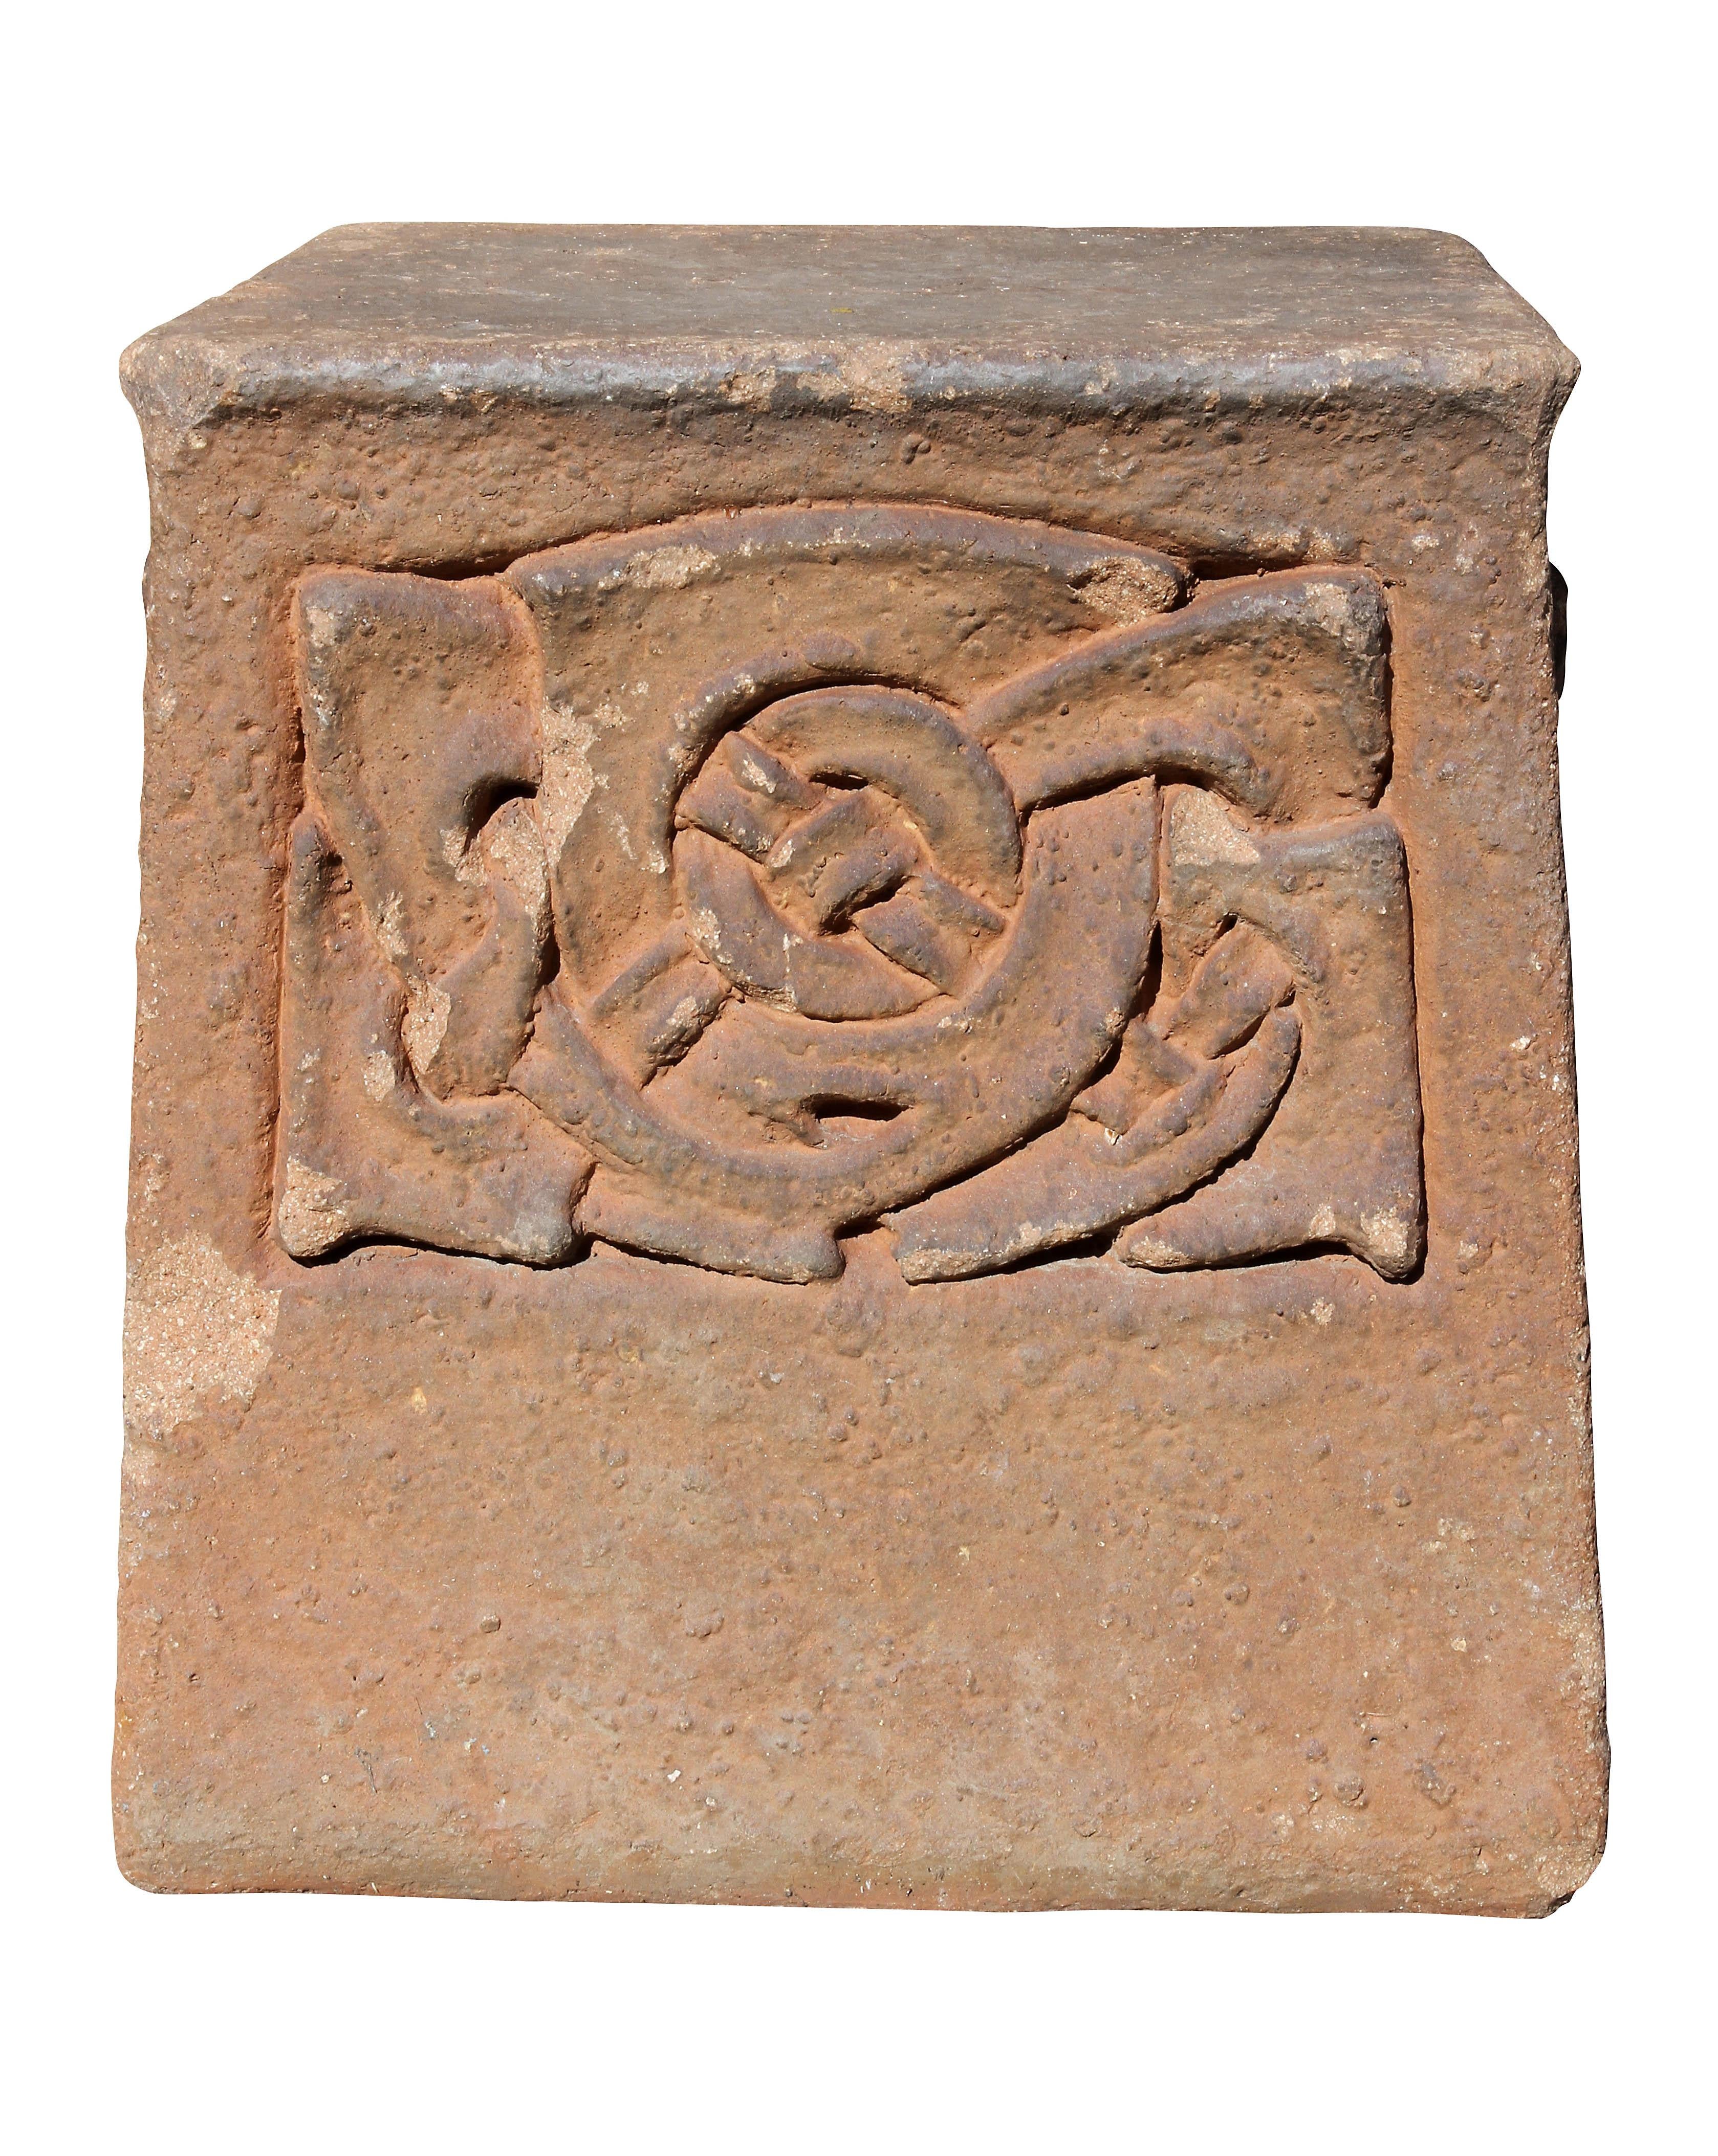 Square with Celtic decoration. Stamped makers mark on side.